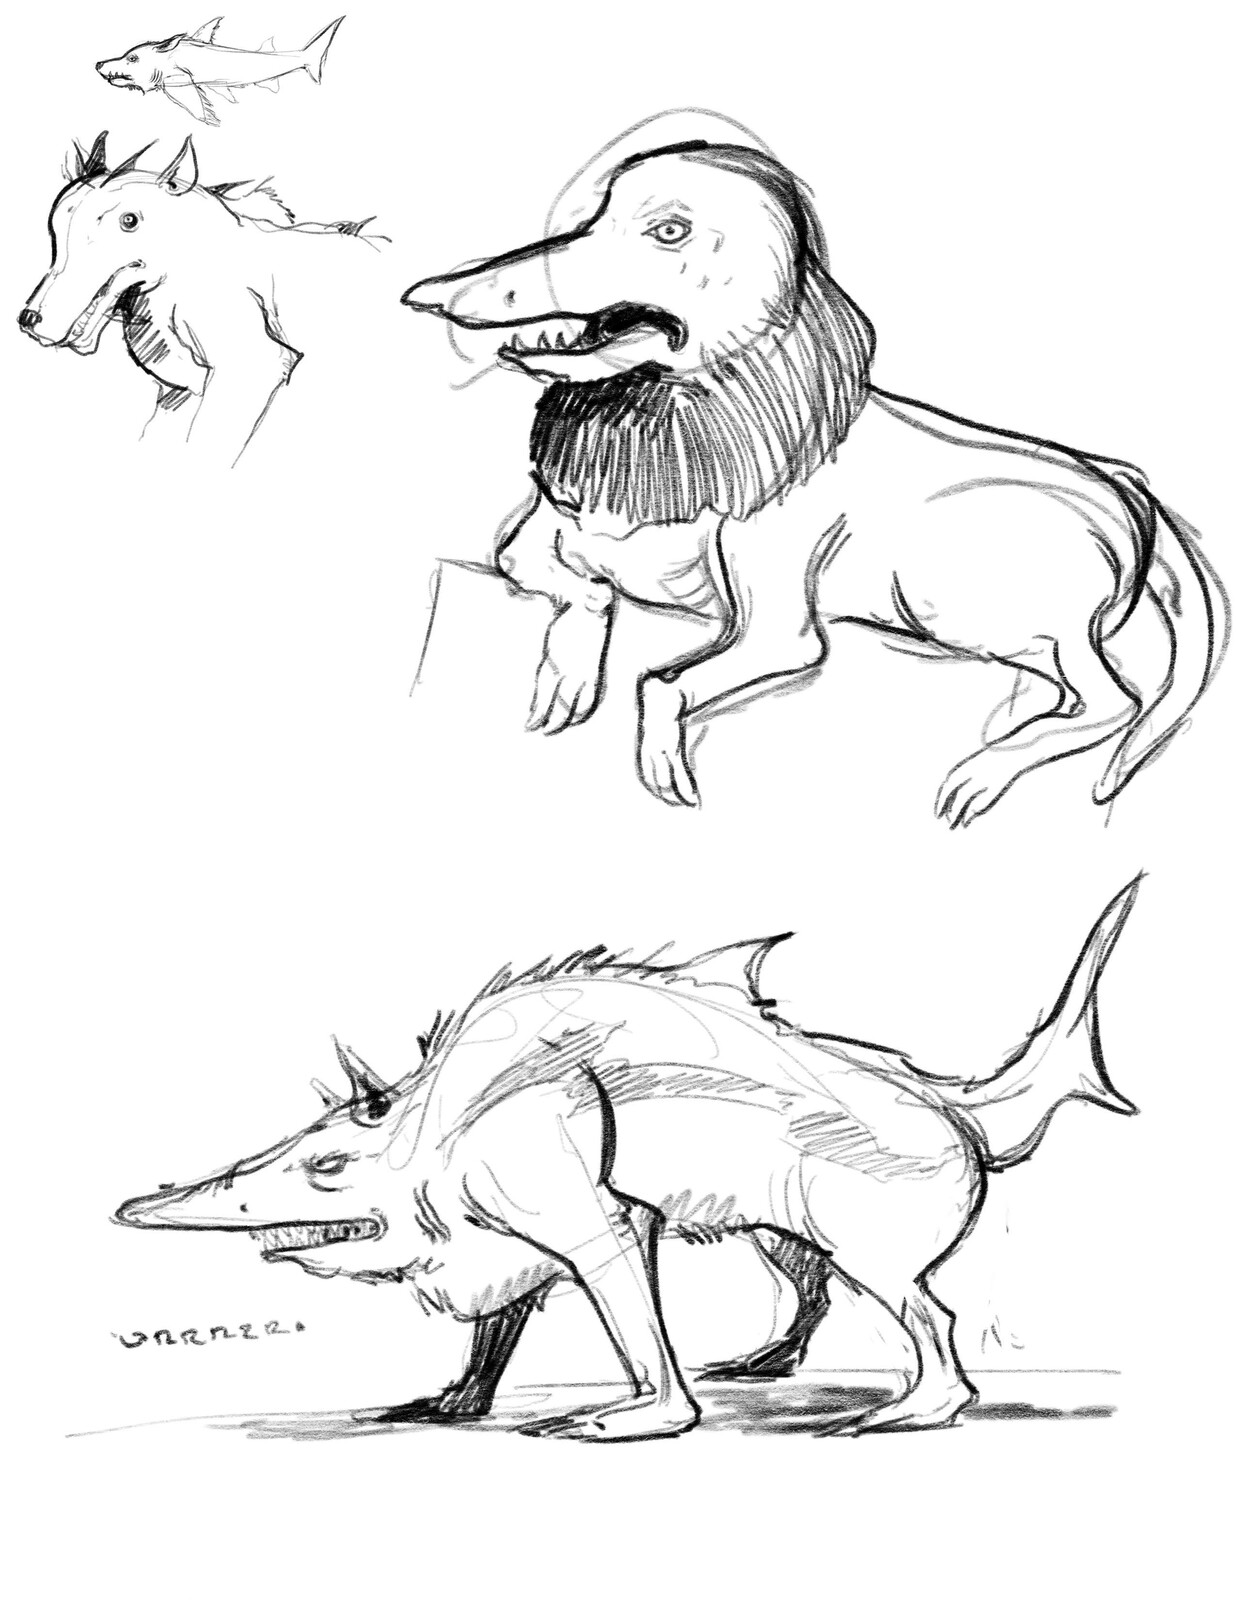 Concept ideation for the Shark Wolf creature character #1.